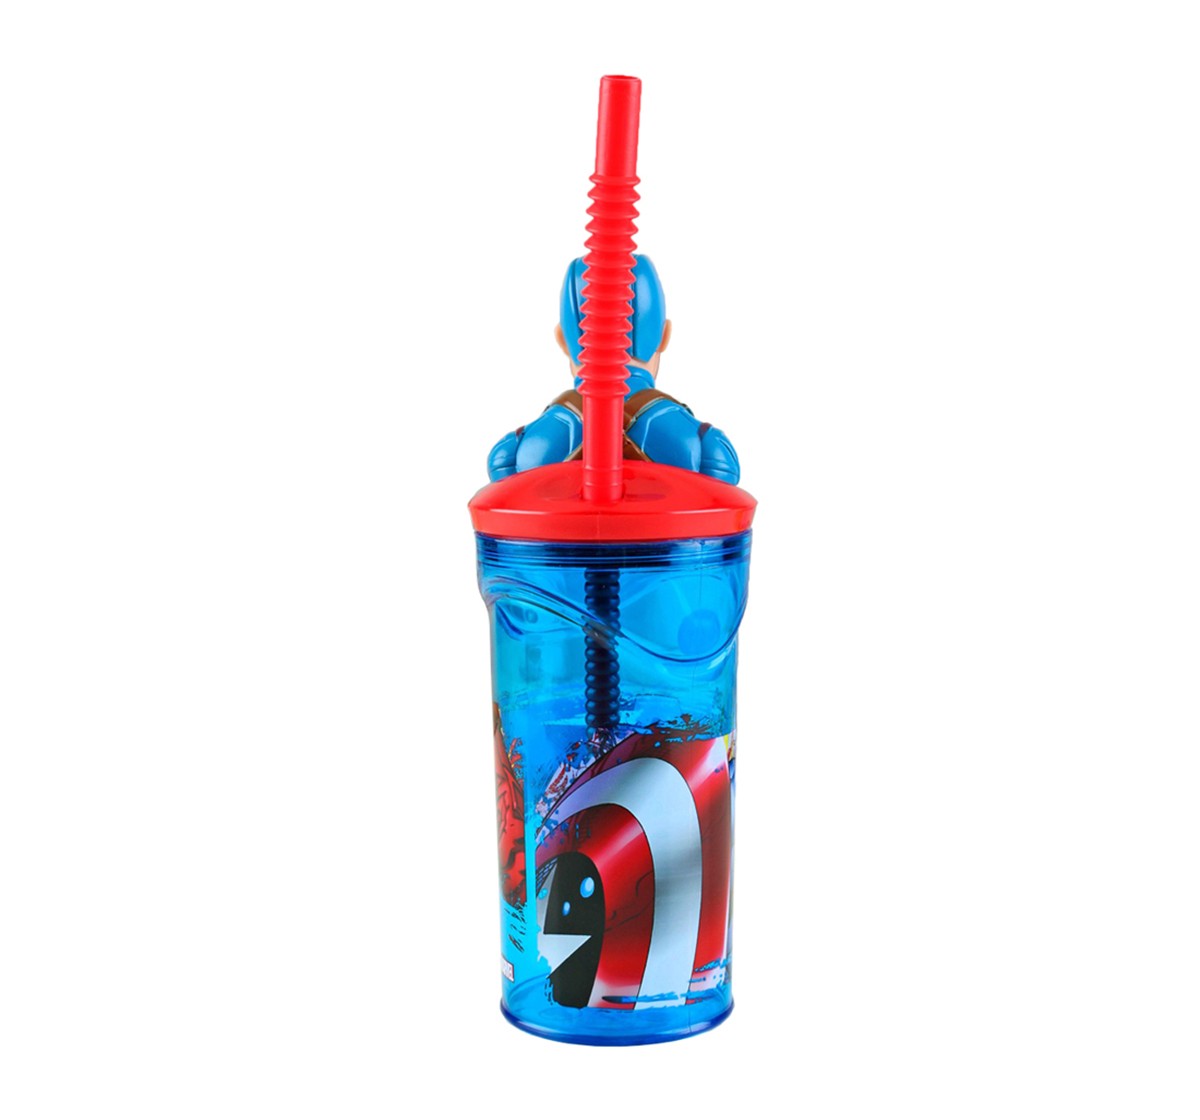 Marvel story 3D Figurine Tumbler Avengers Gallery Captain America, Blue Water Bottles & Sipper for age 3Y+ (Blue),360 ml